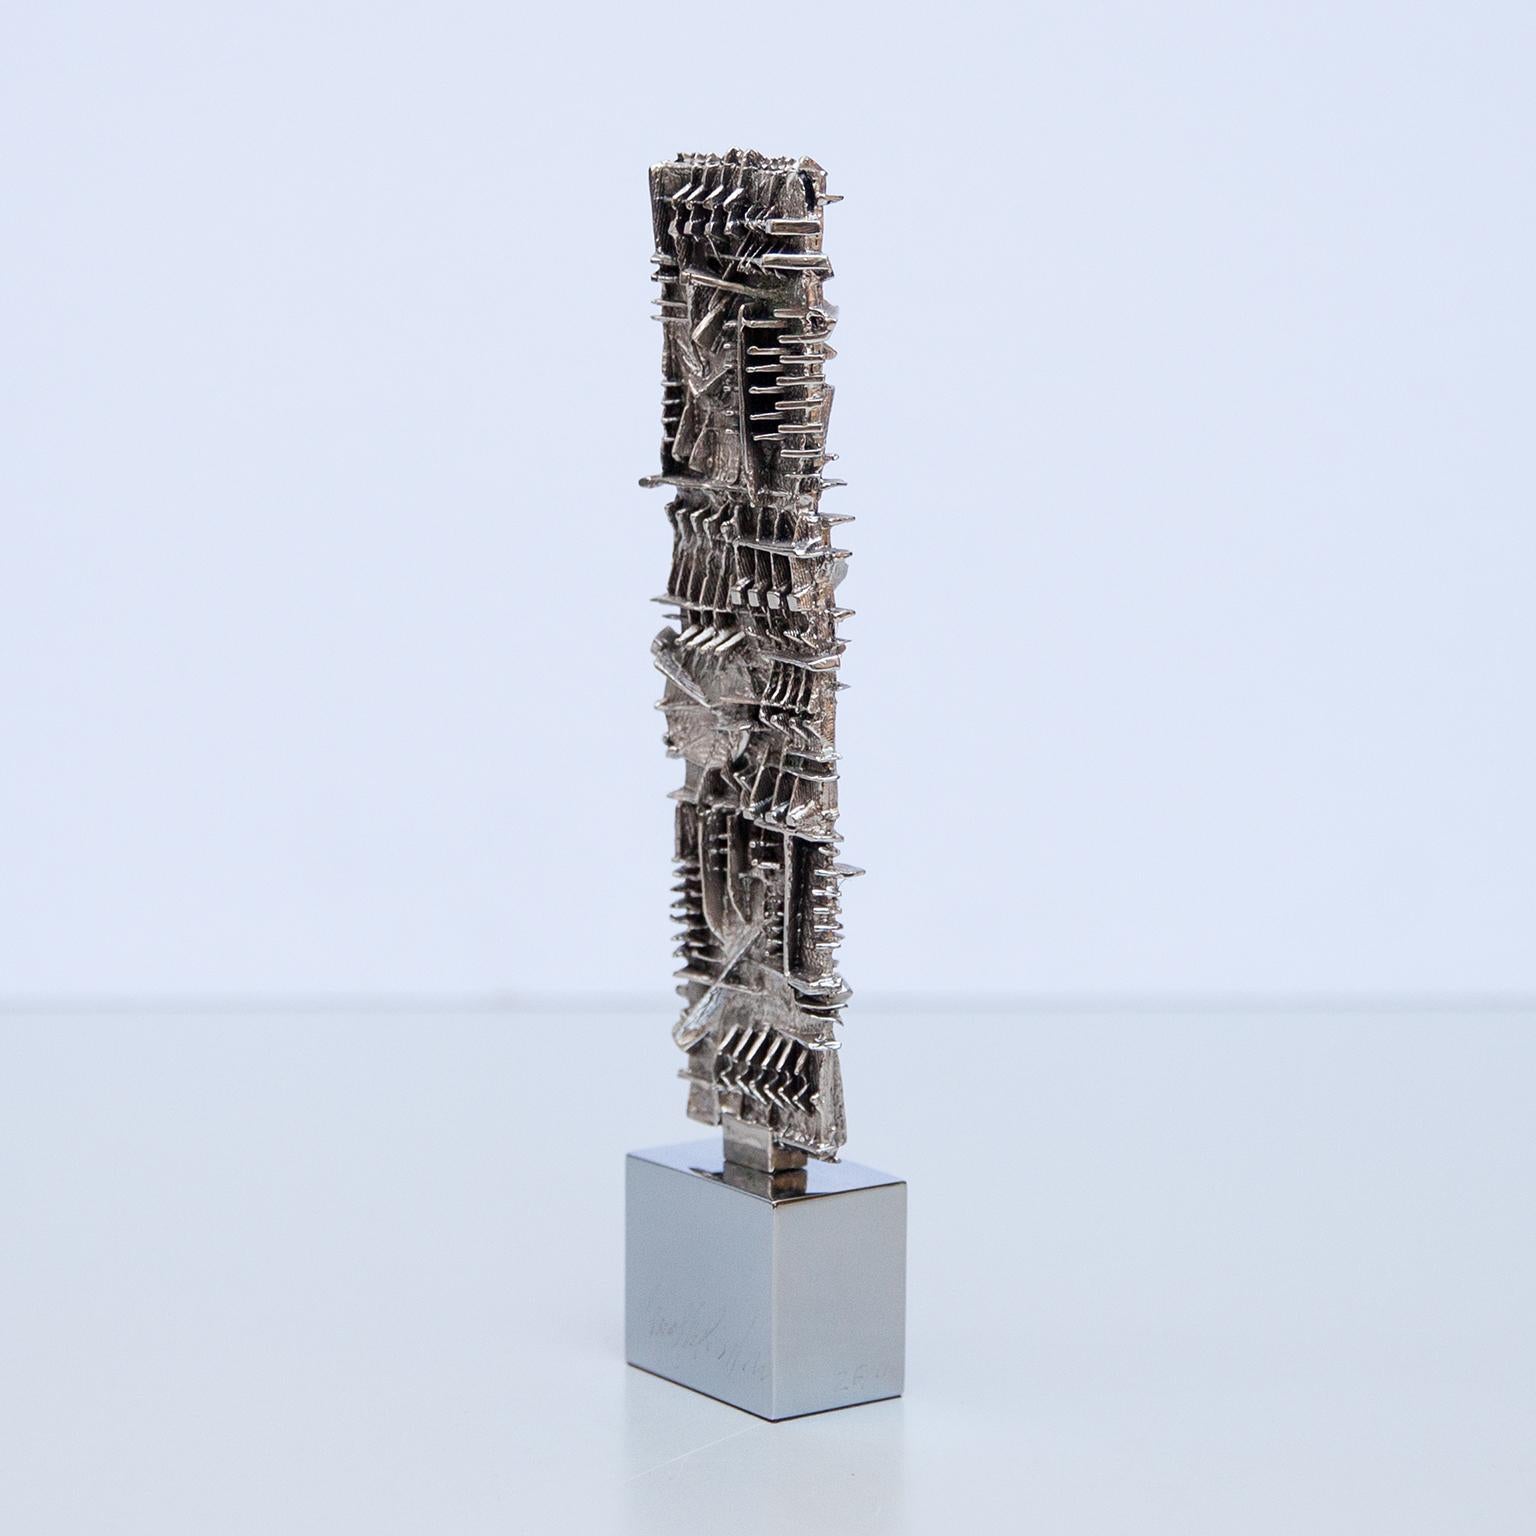 Arnaldo Pomodoro silver plated bronze Stele executed in an edition of 100 for the occasion of the press conference of Siemens in Rome 1986.

Signed and numbered 23/100.